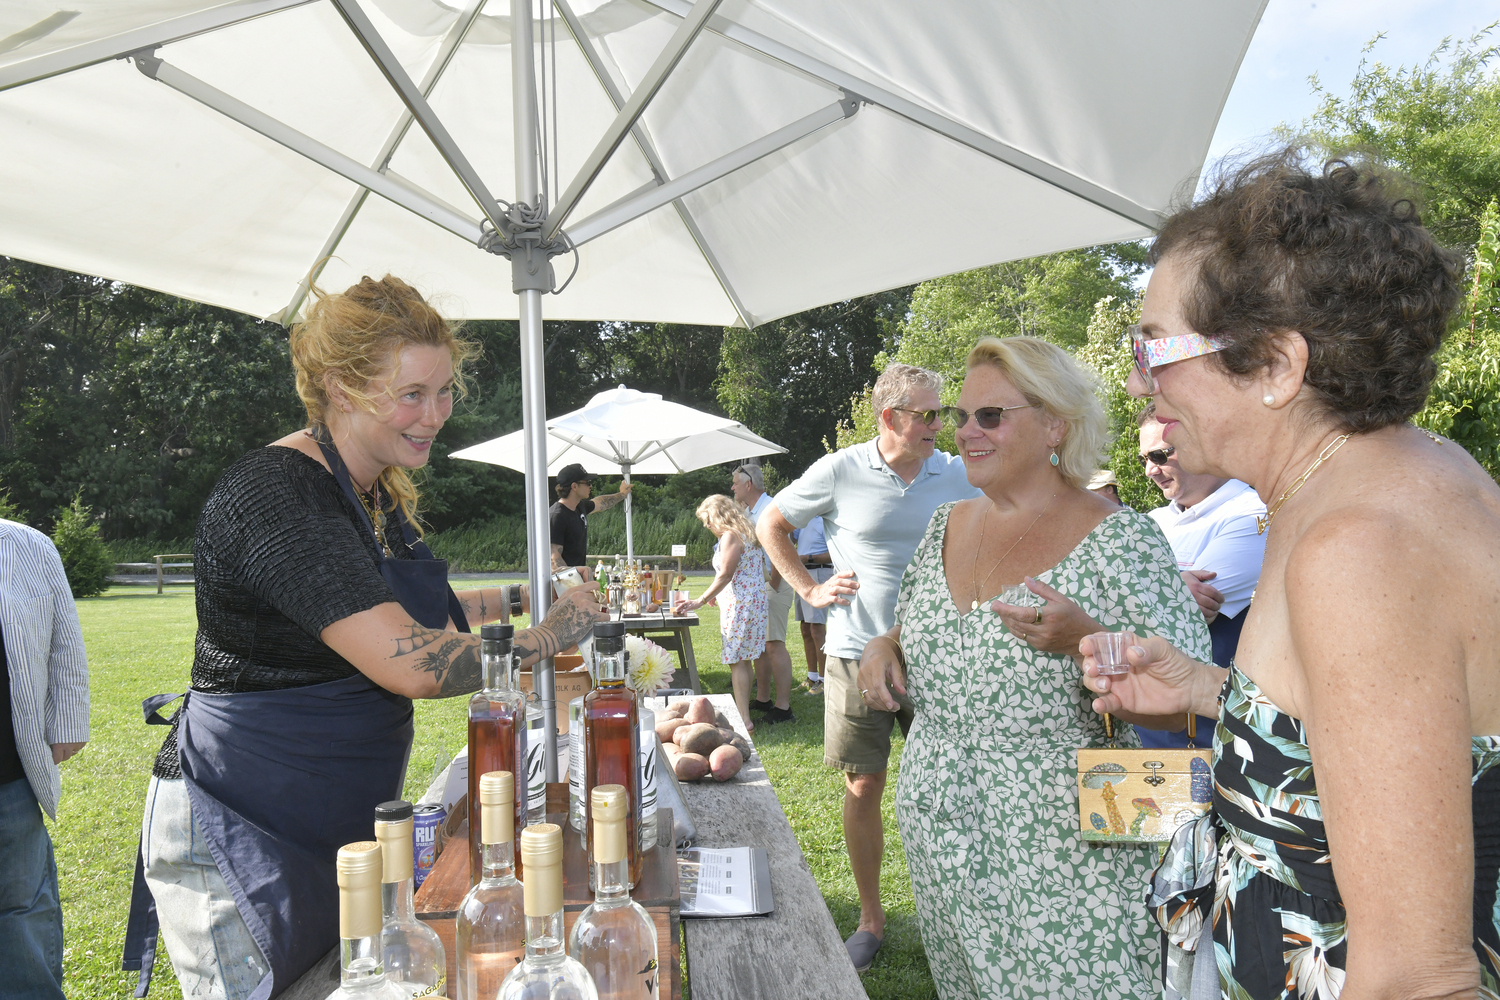 The Express Magazine's Sips of Summer series will return for its second year starting June 5.